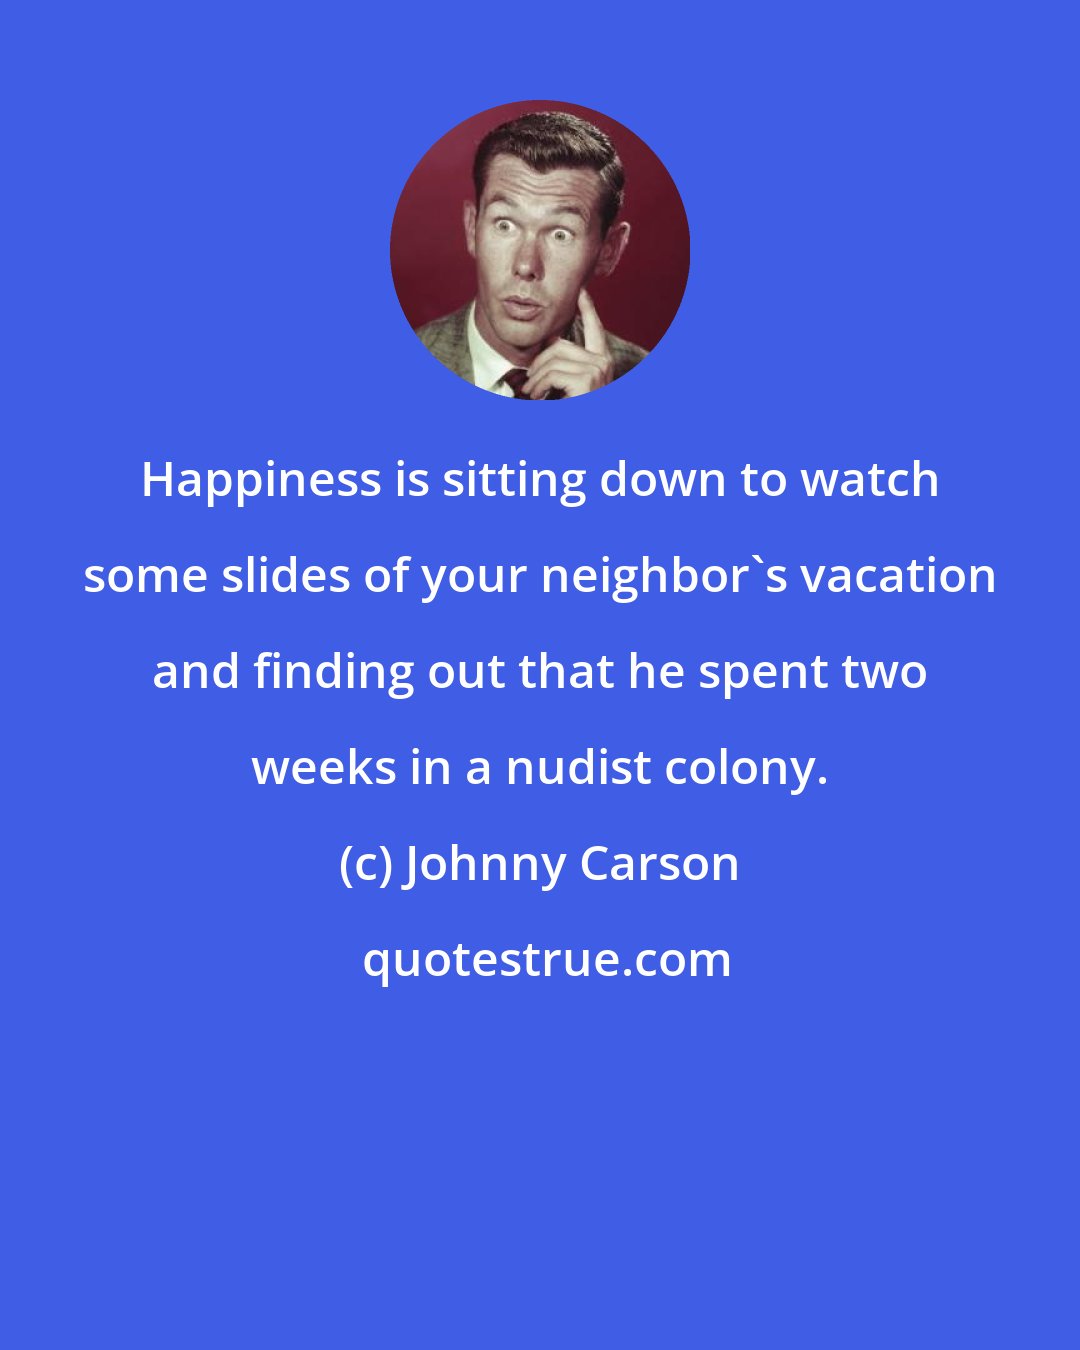 Johnny Carson: Happiness is sitting down to watch some slides of your neighbor's vacation and finding out that he spent two weeks in a nudist colony.